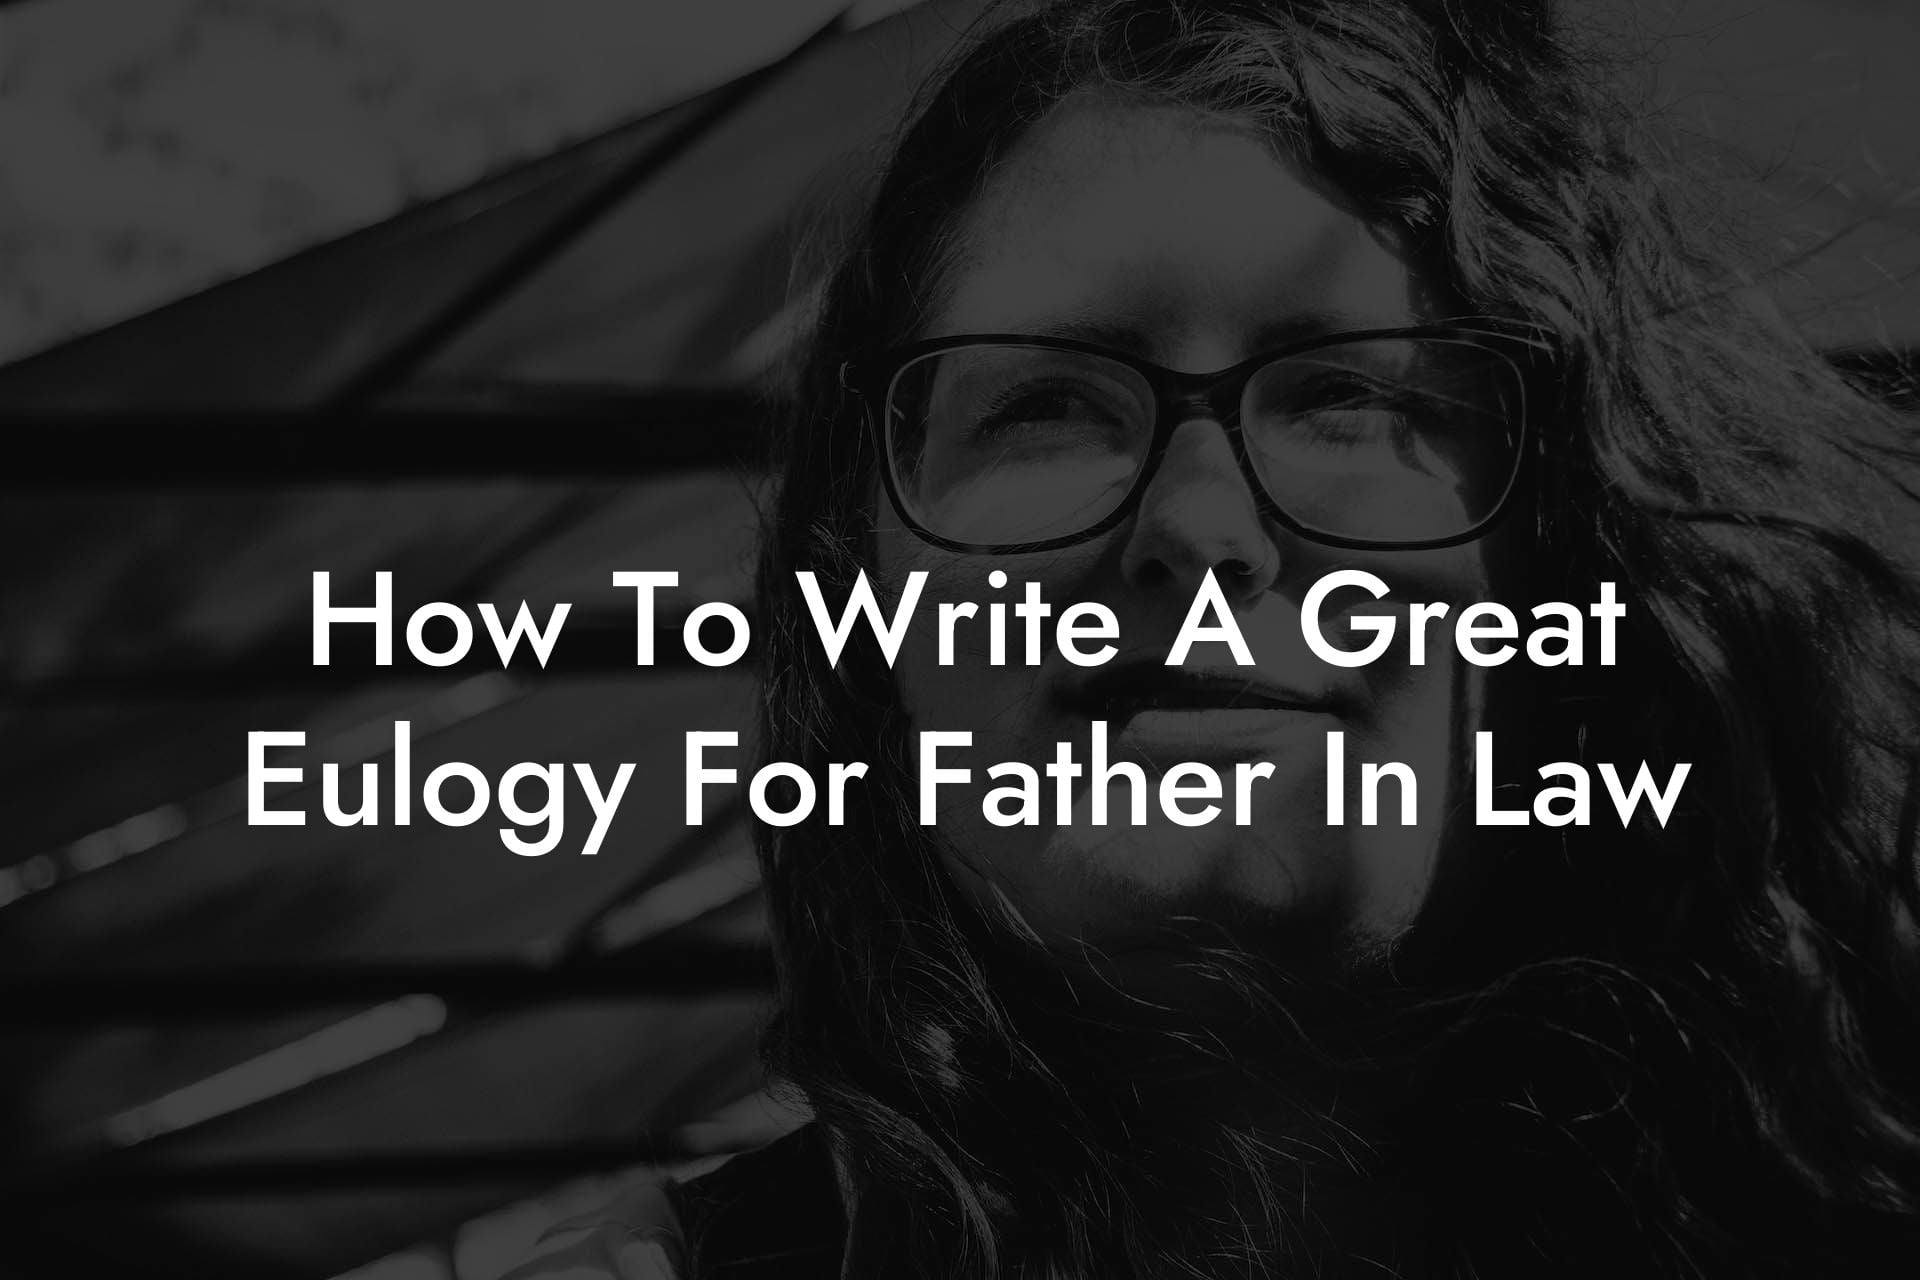 How To Write A Great Eulogy For Father In Law